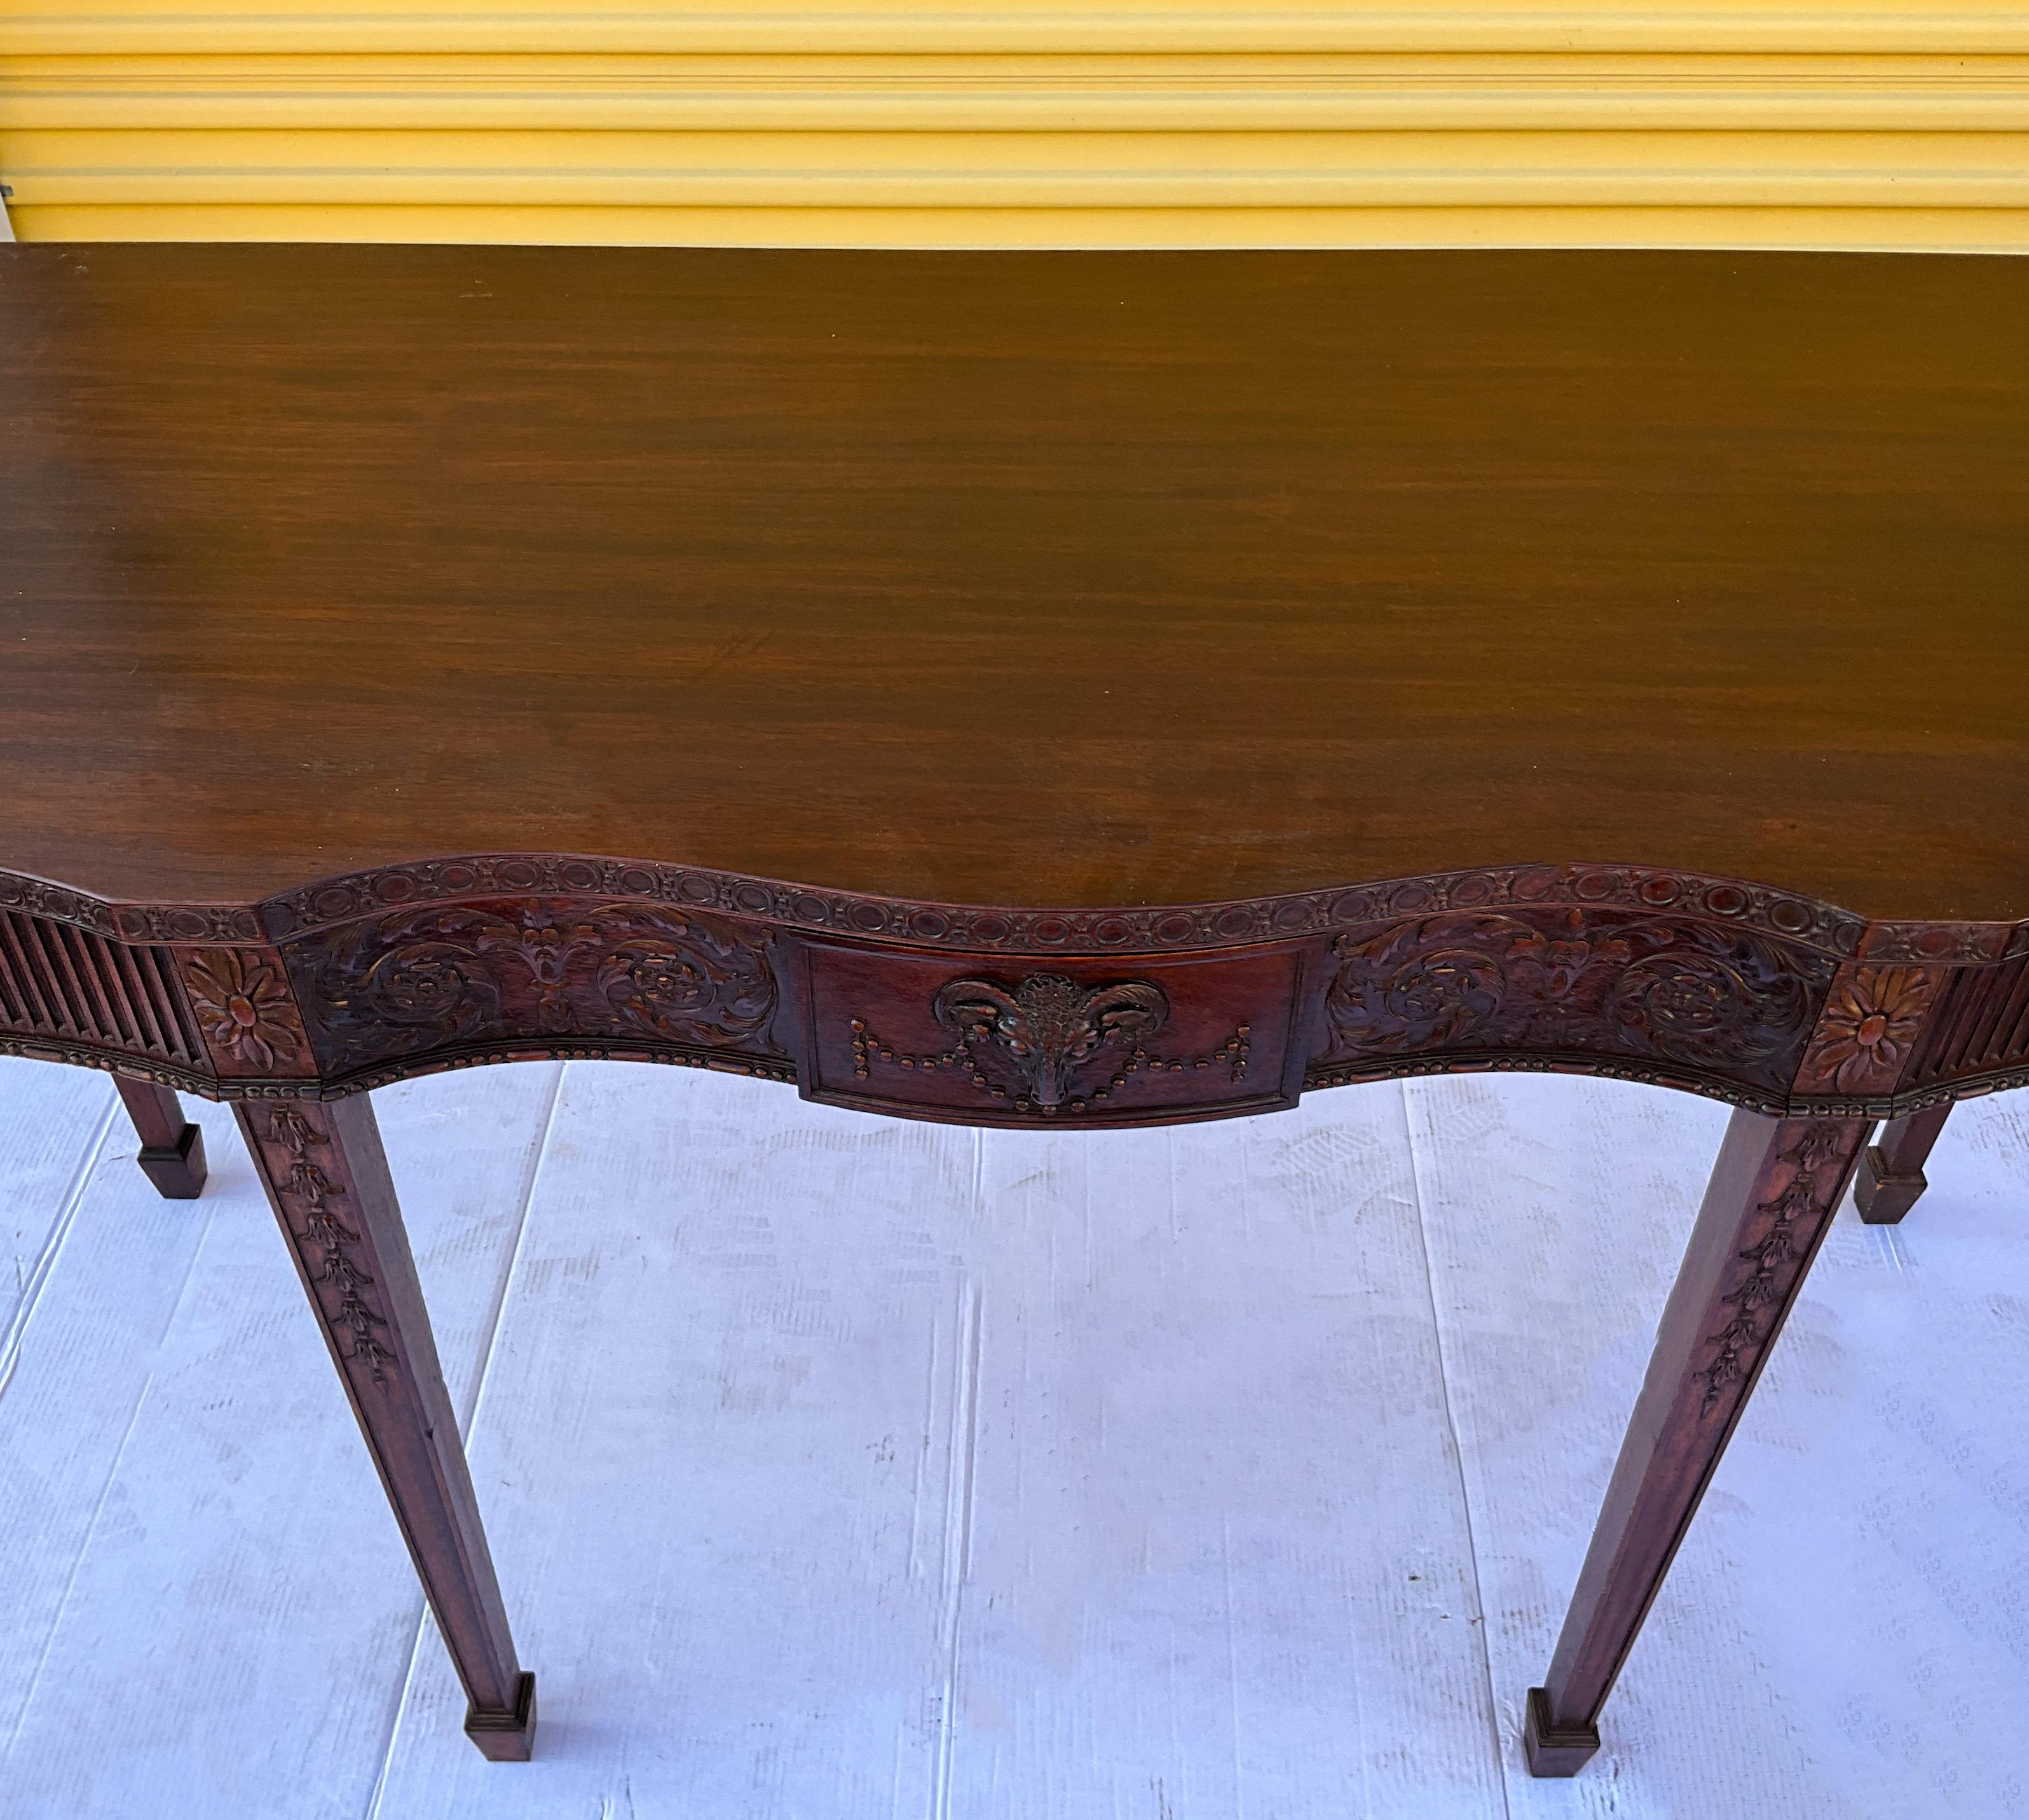 This is a statement piece! This is a 1940s carved mahogany hunt board with a sculpted top and a single drawer with dovetail construction. It has a carved ram’s head as well as other Greco - Roman elements. The tapered legs have spade feet.